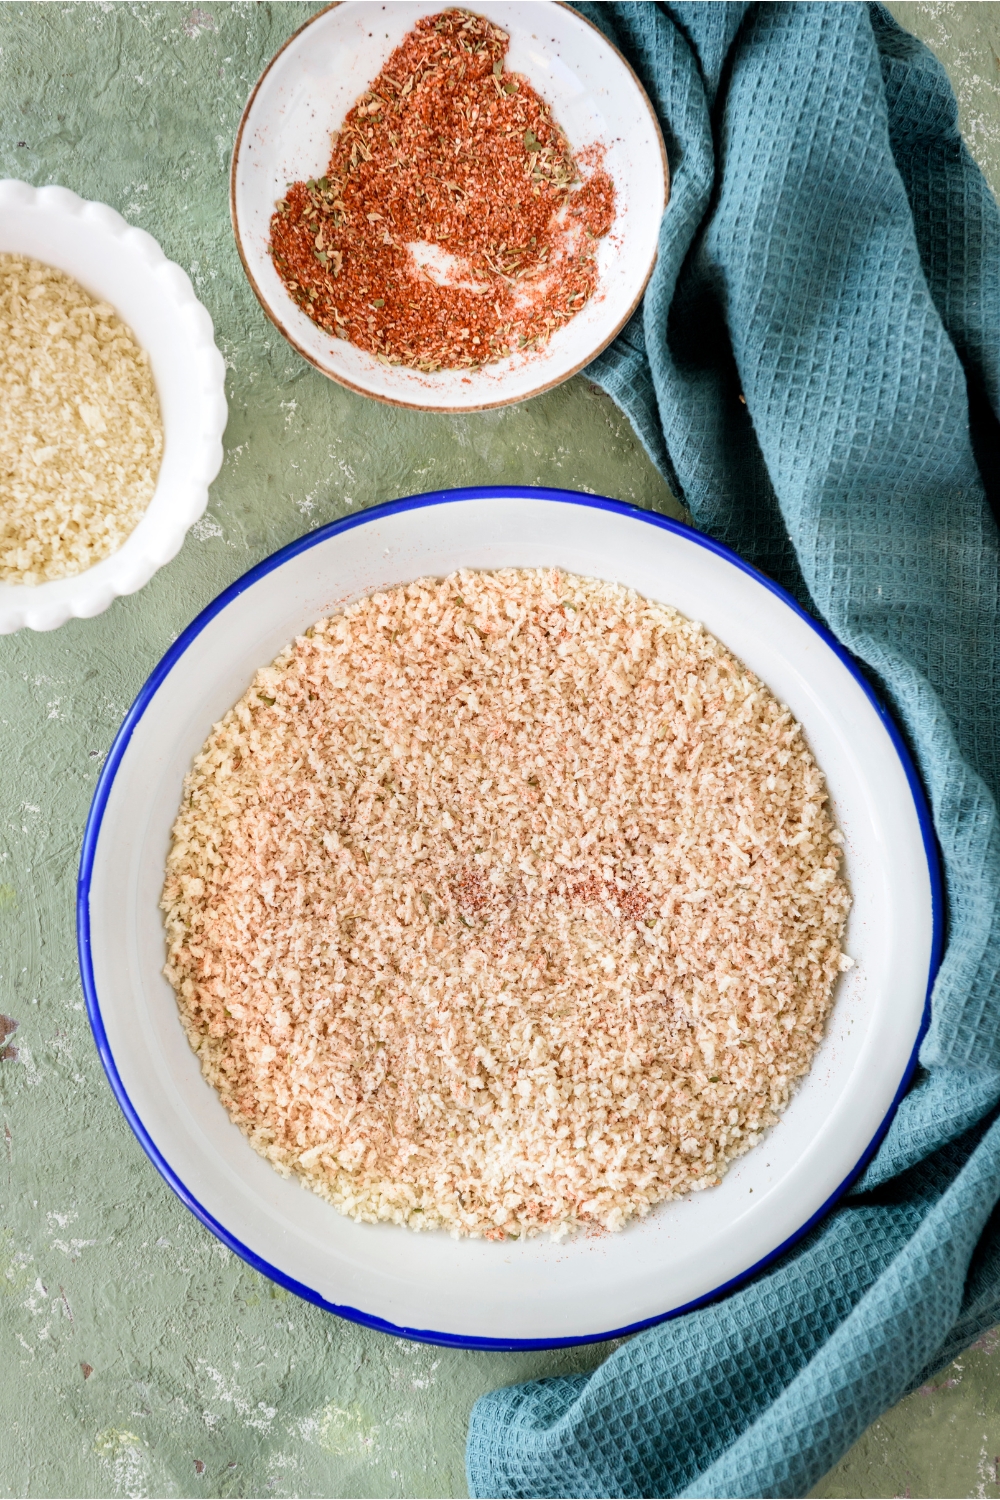 A shallow bowl filled with a seasoned breadcrumb mixture.